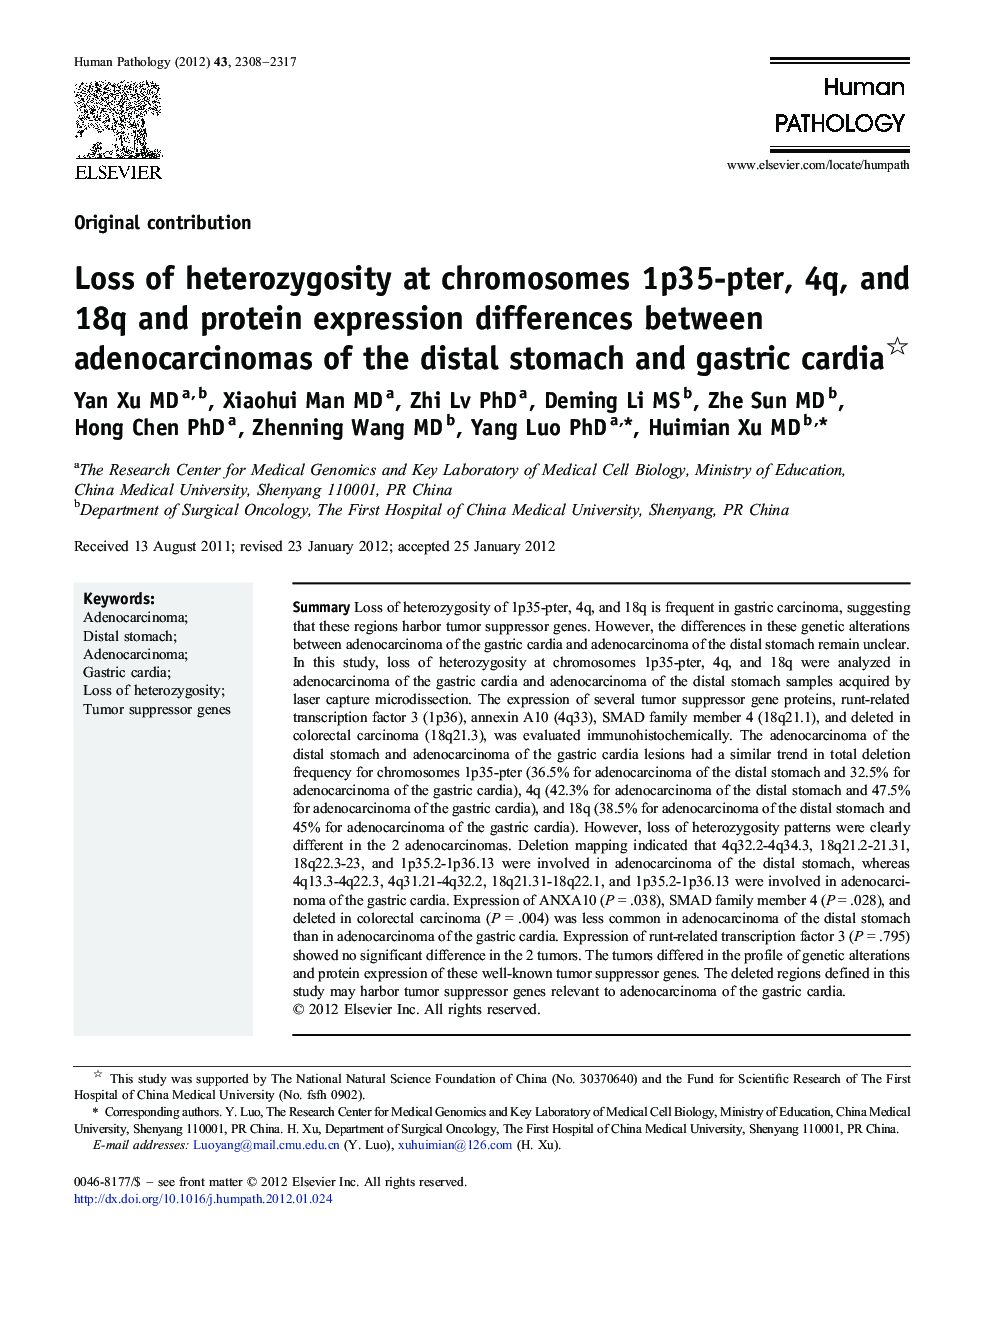 Loss of heterozygosity at chromosomes 1p35-pter, 4q, and 18q and protein expression differences between adenocarcinomas of the distal stomach and gastric cardia 